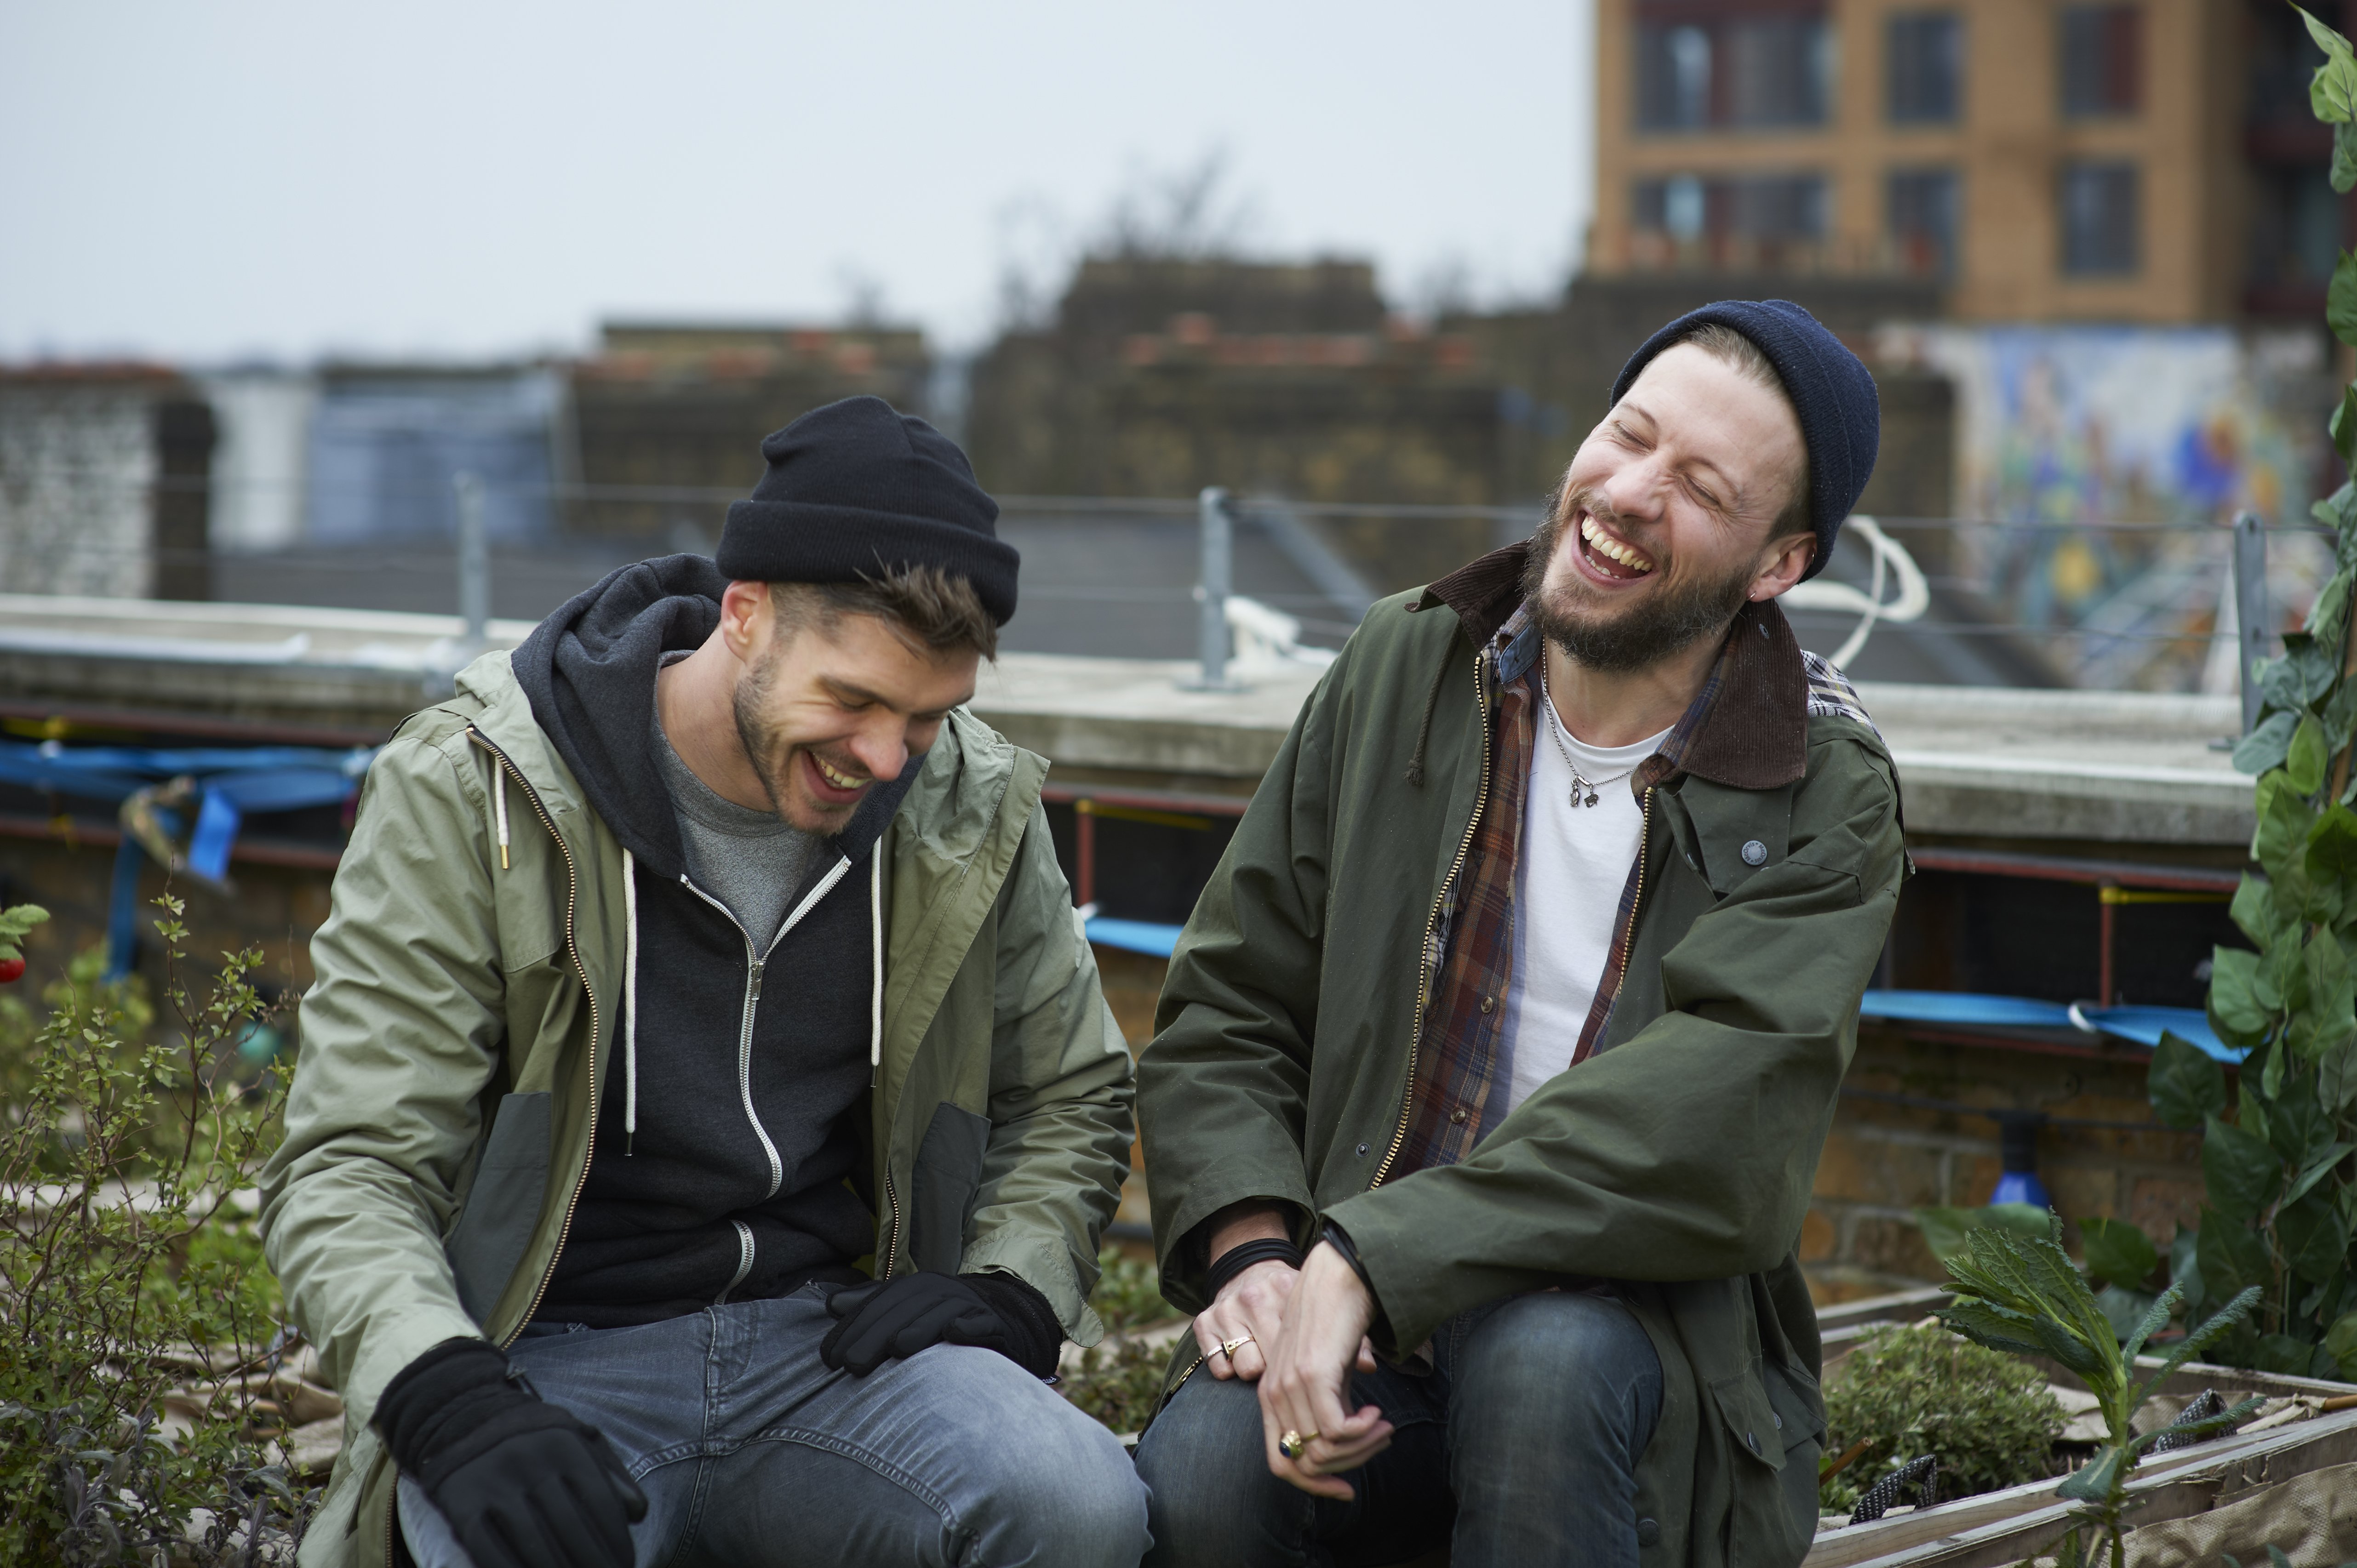 Two young men are pictured sitting among plants in an allotment on an urban roof garden sharing a joke | Source: Getty Images